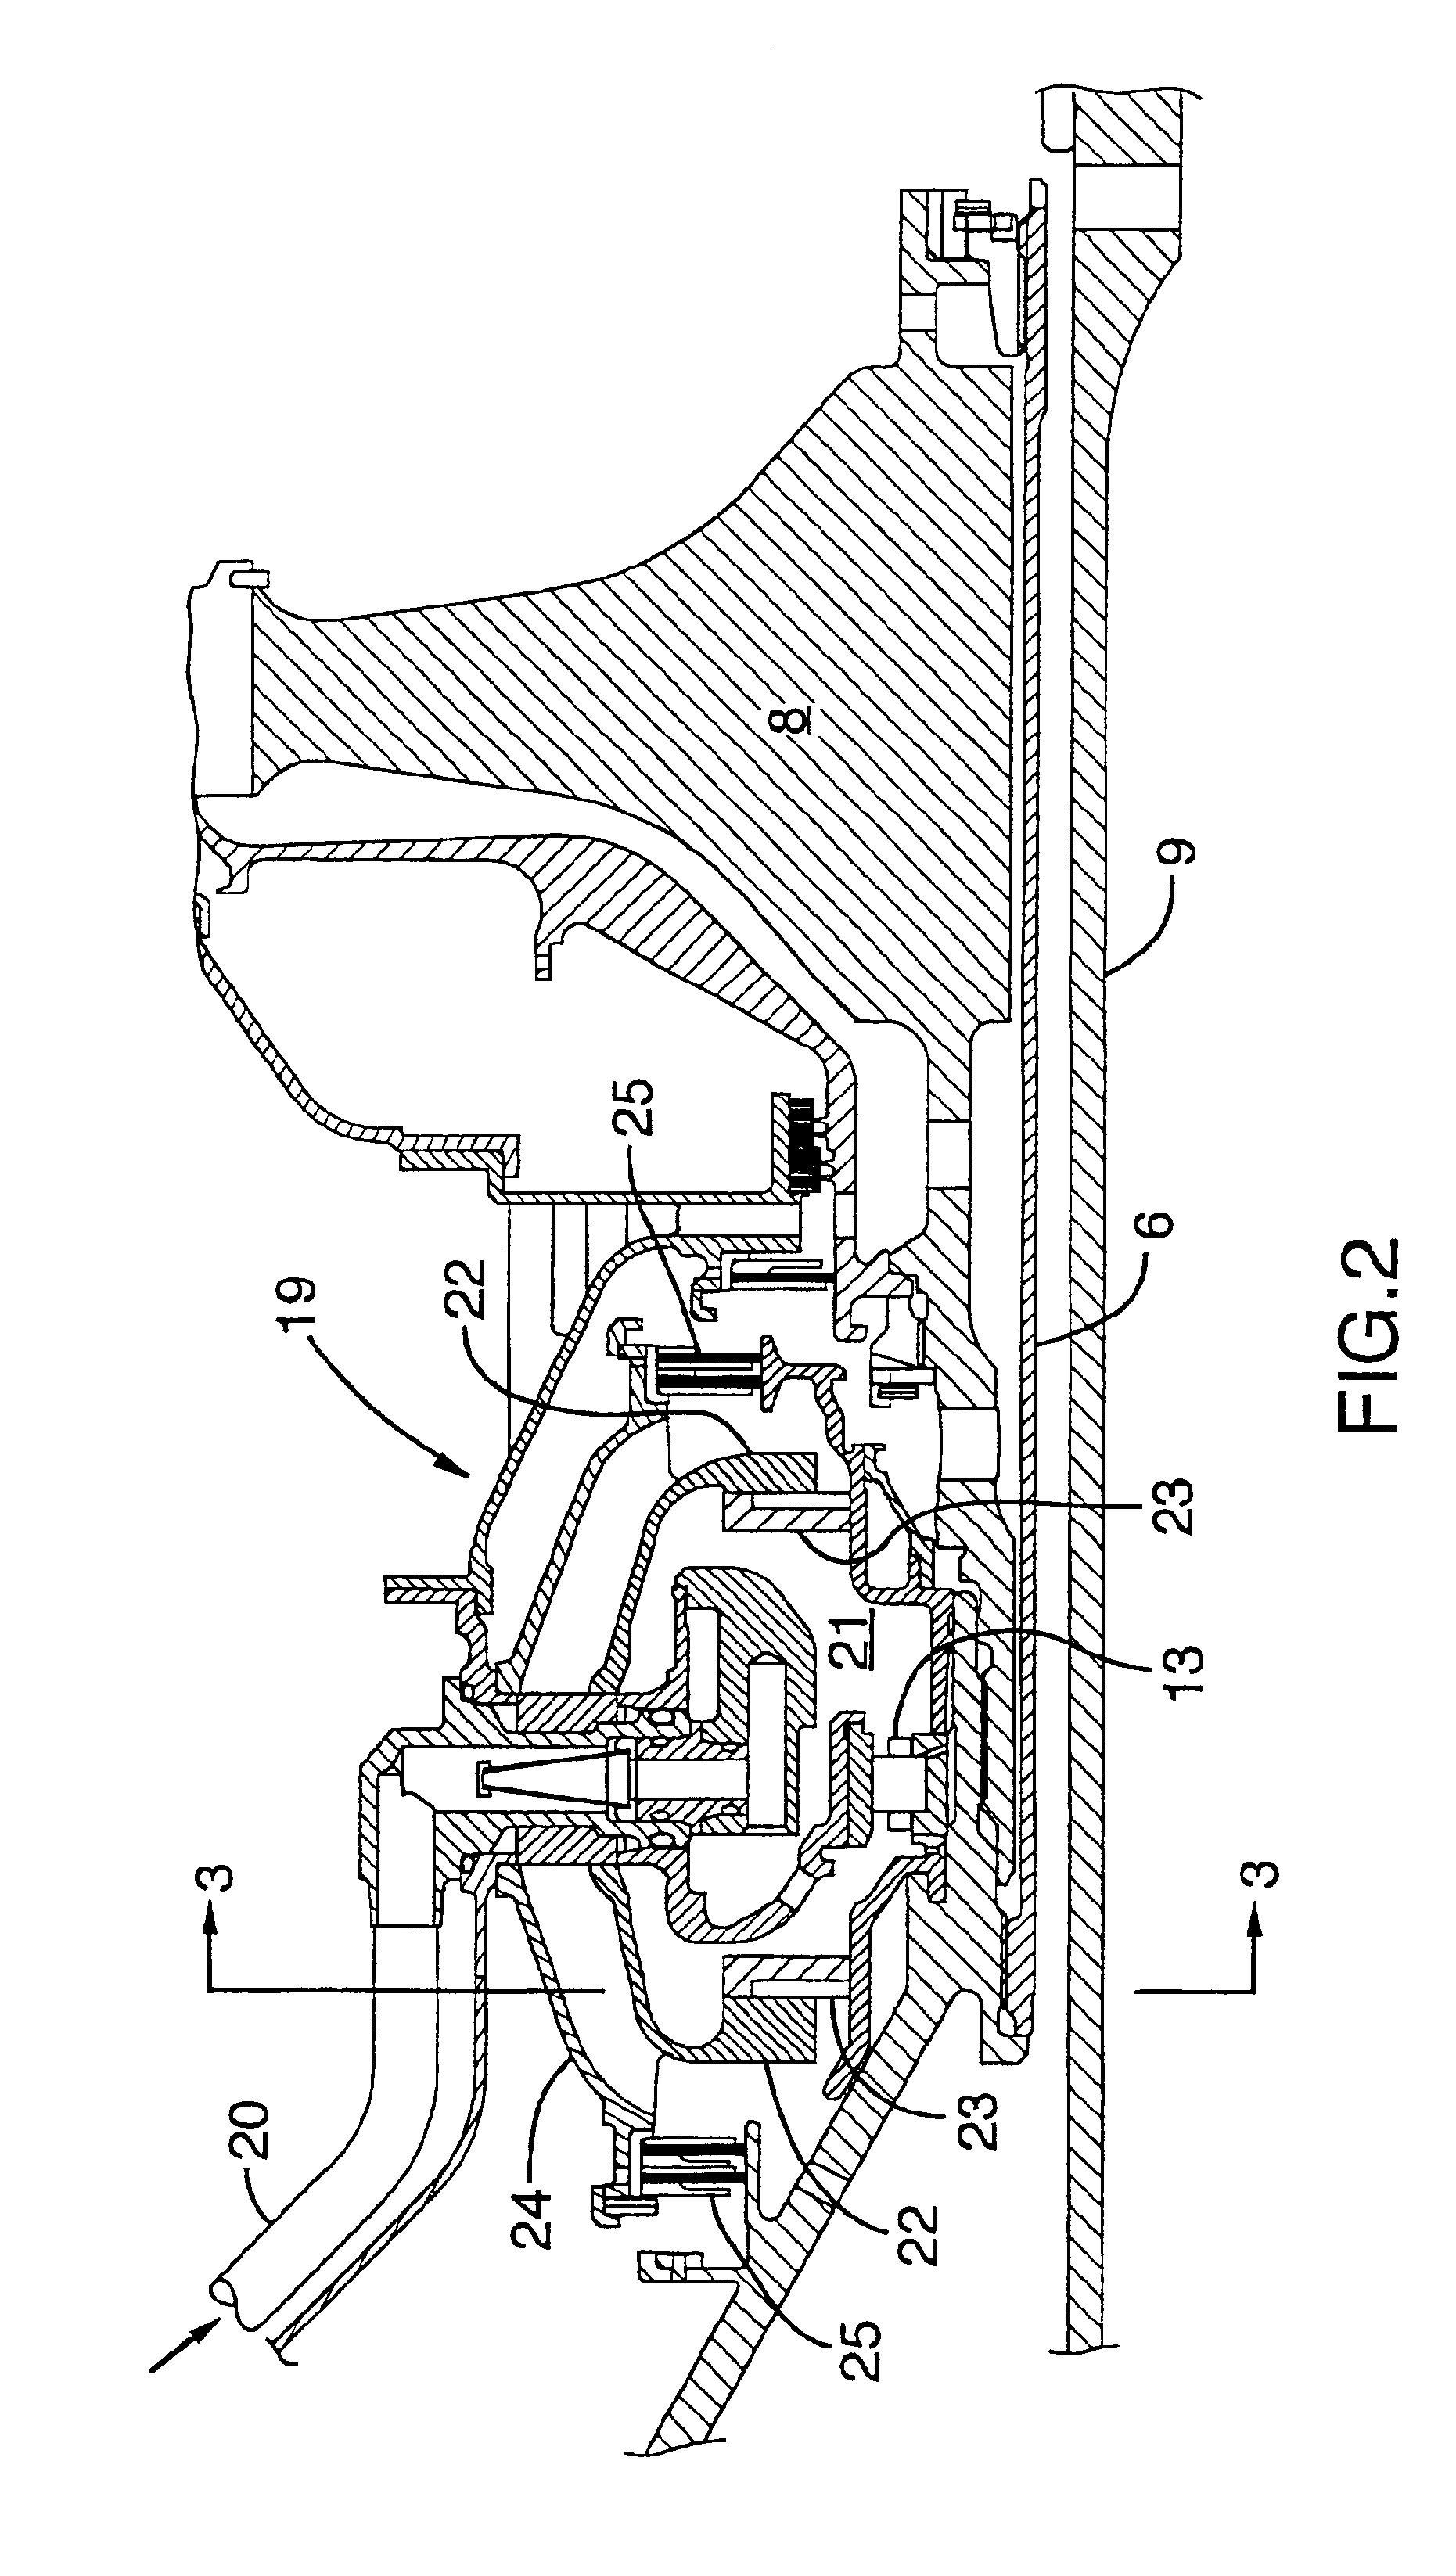 Method and device for minimizing oil consumption in a gas turbine engine